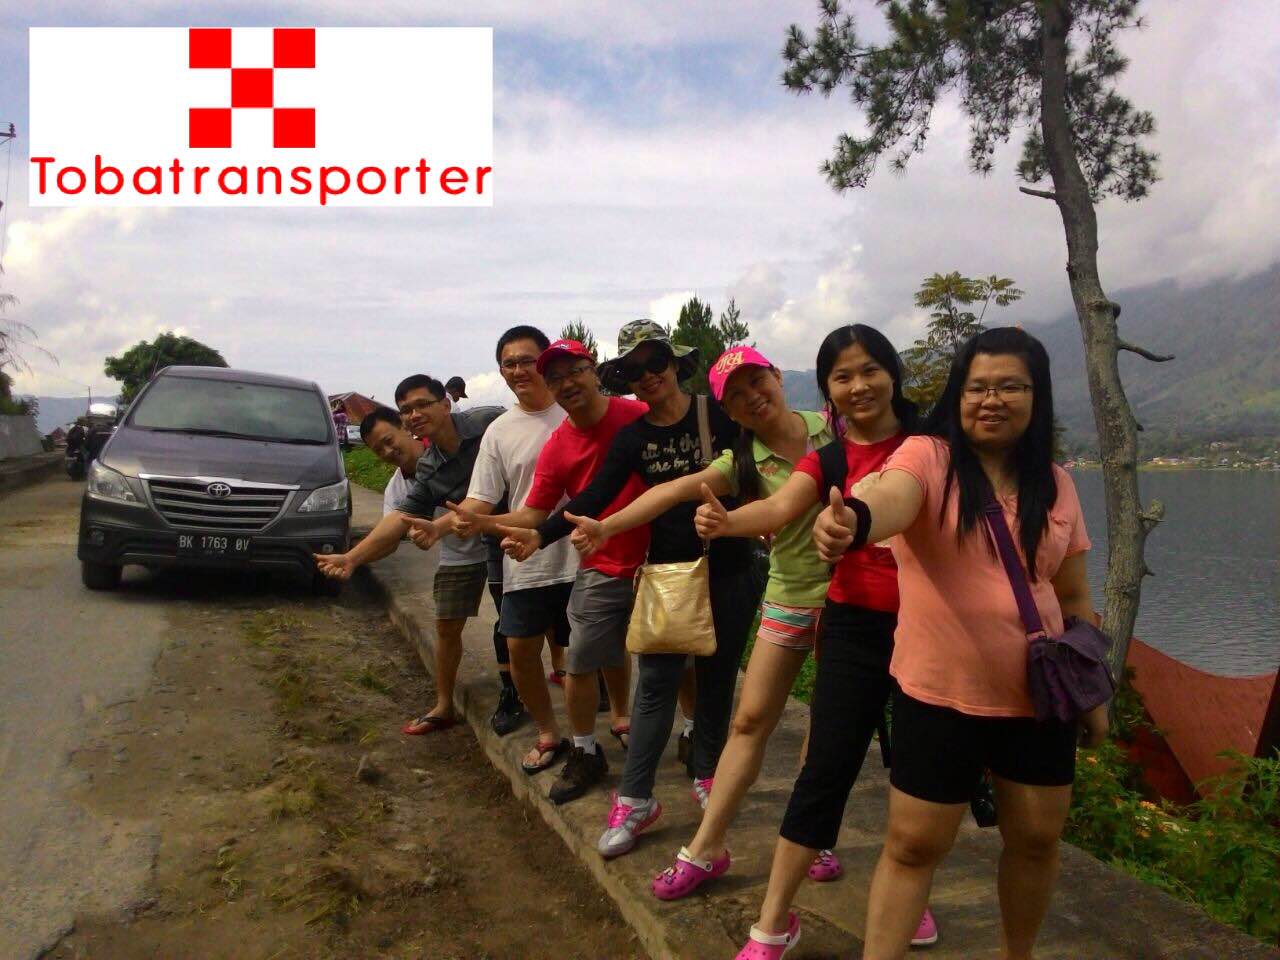 Toba Transporter, The Best and Trusted Medan Travel Agent